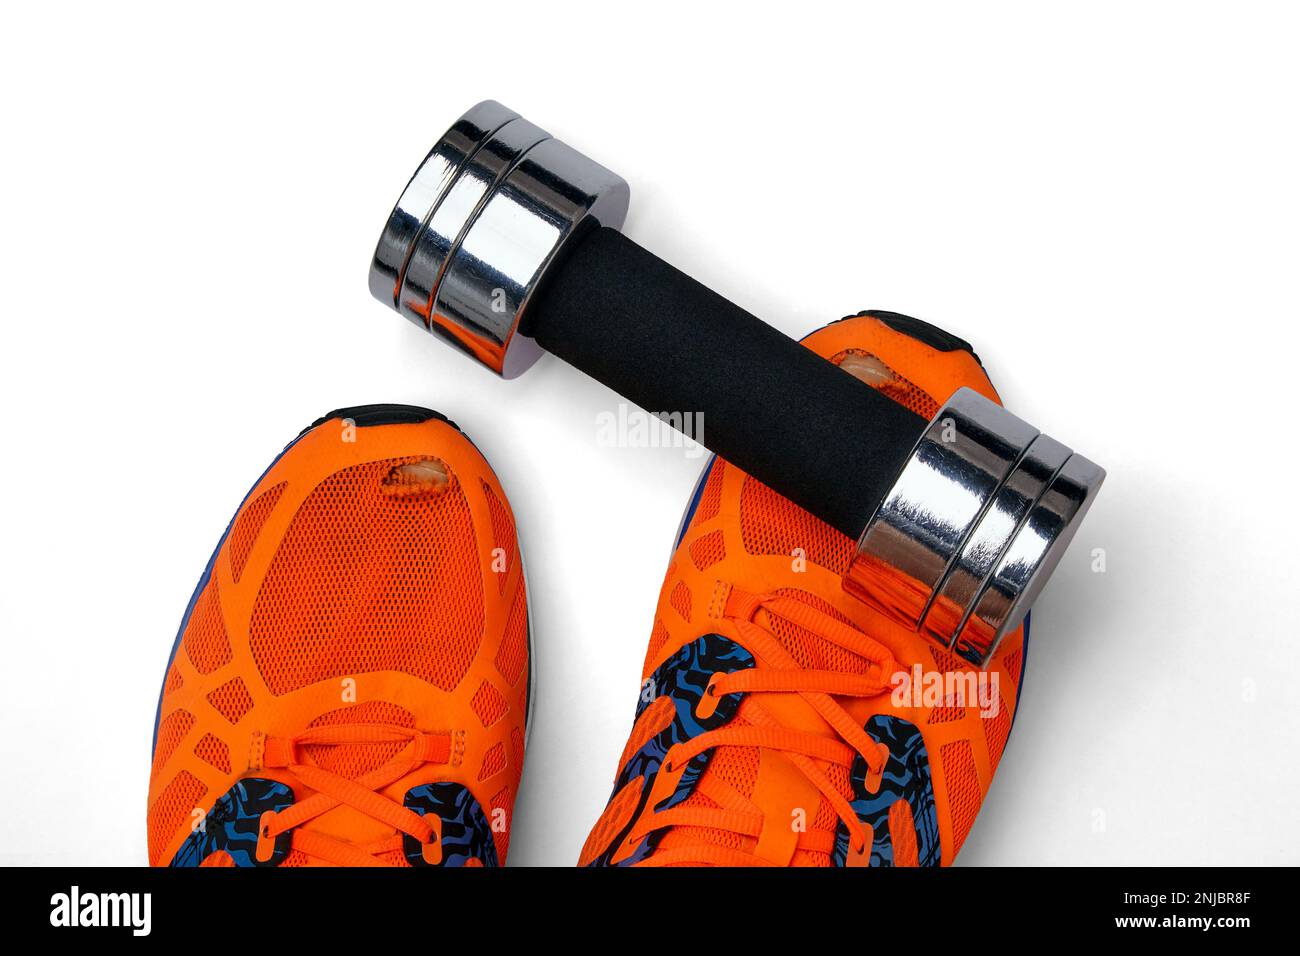 Metal heavy dumbbell fell on a leg in orange torn sneakers on a white background Stock Photo